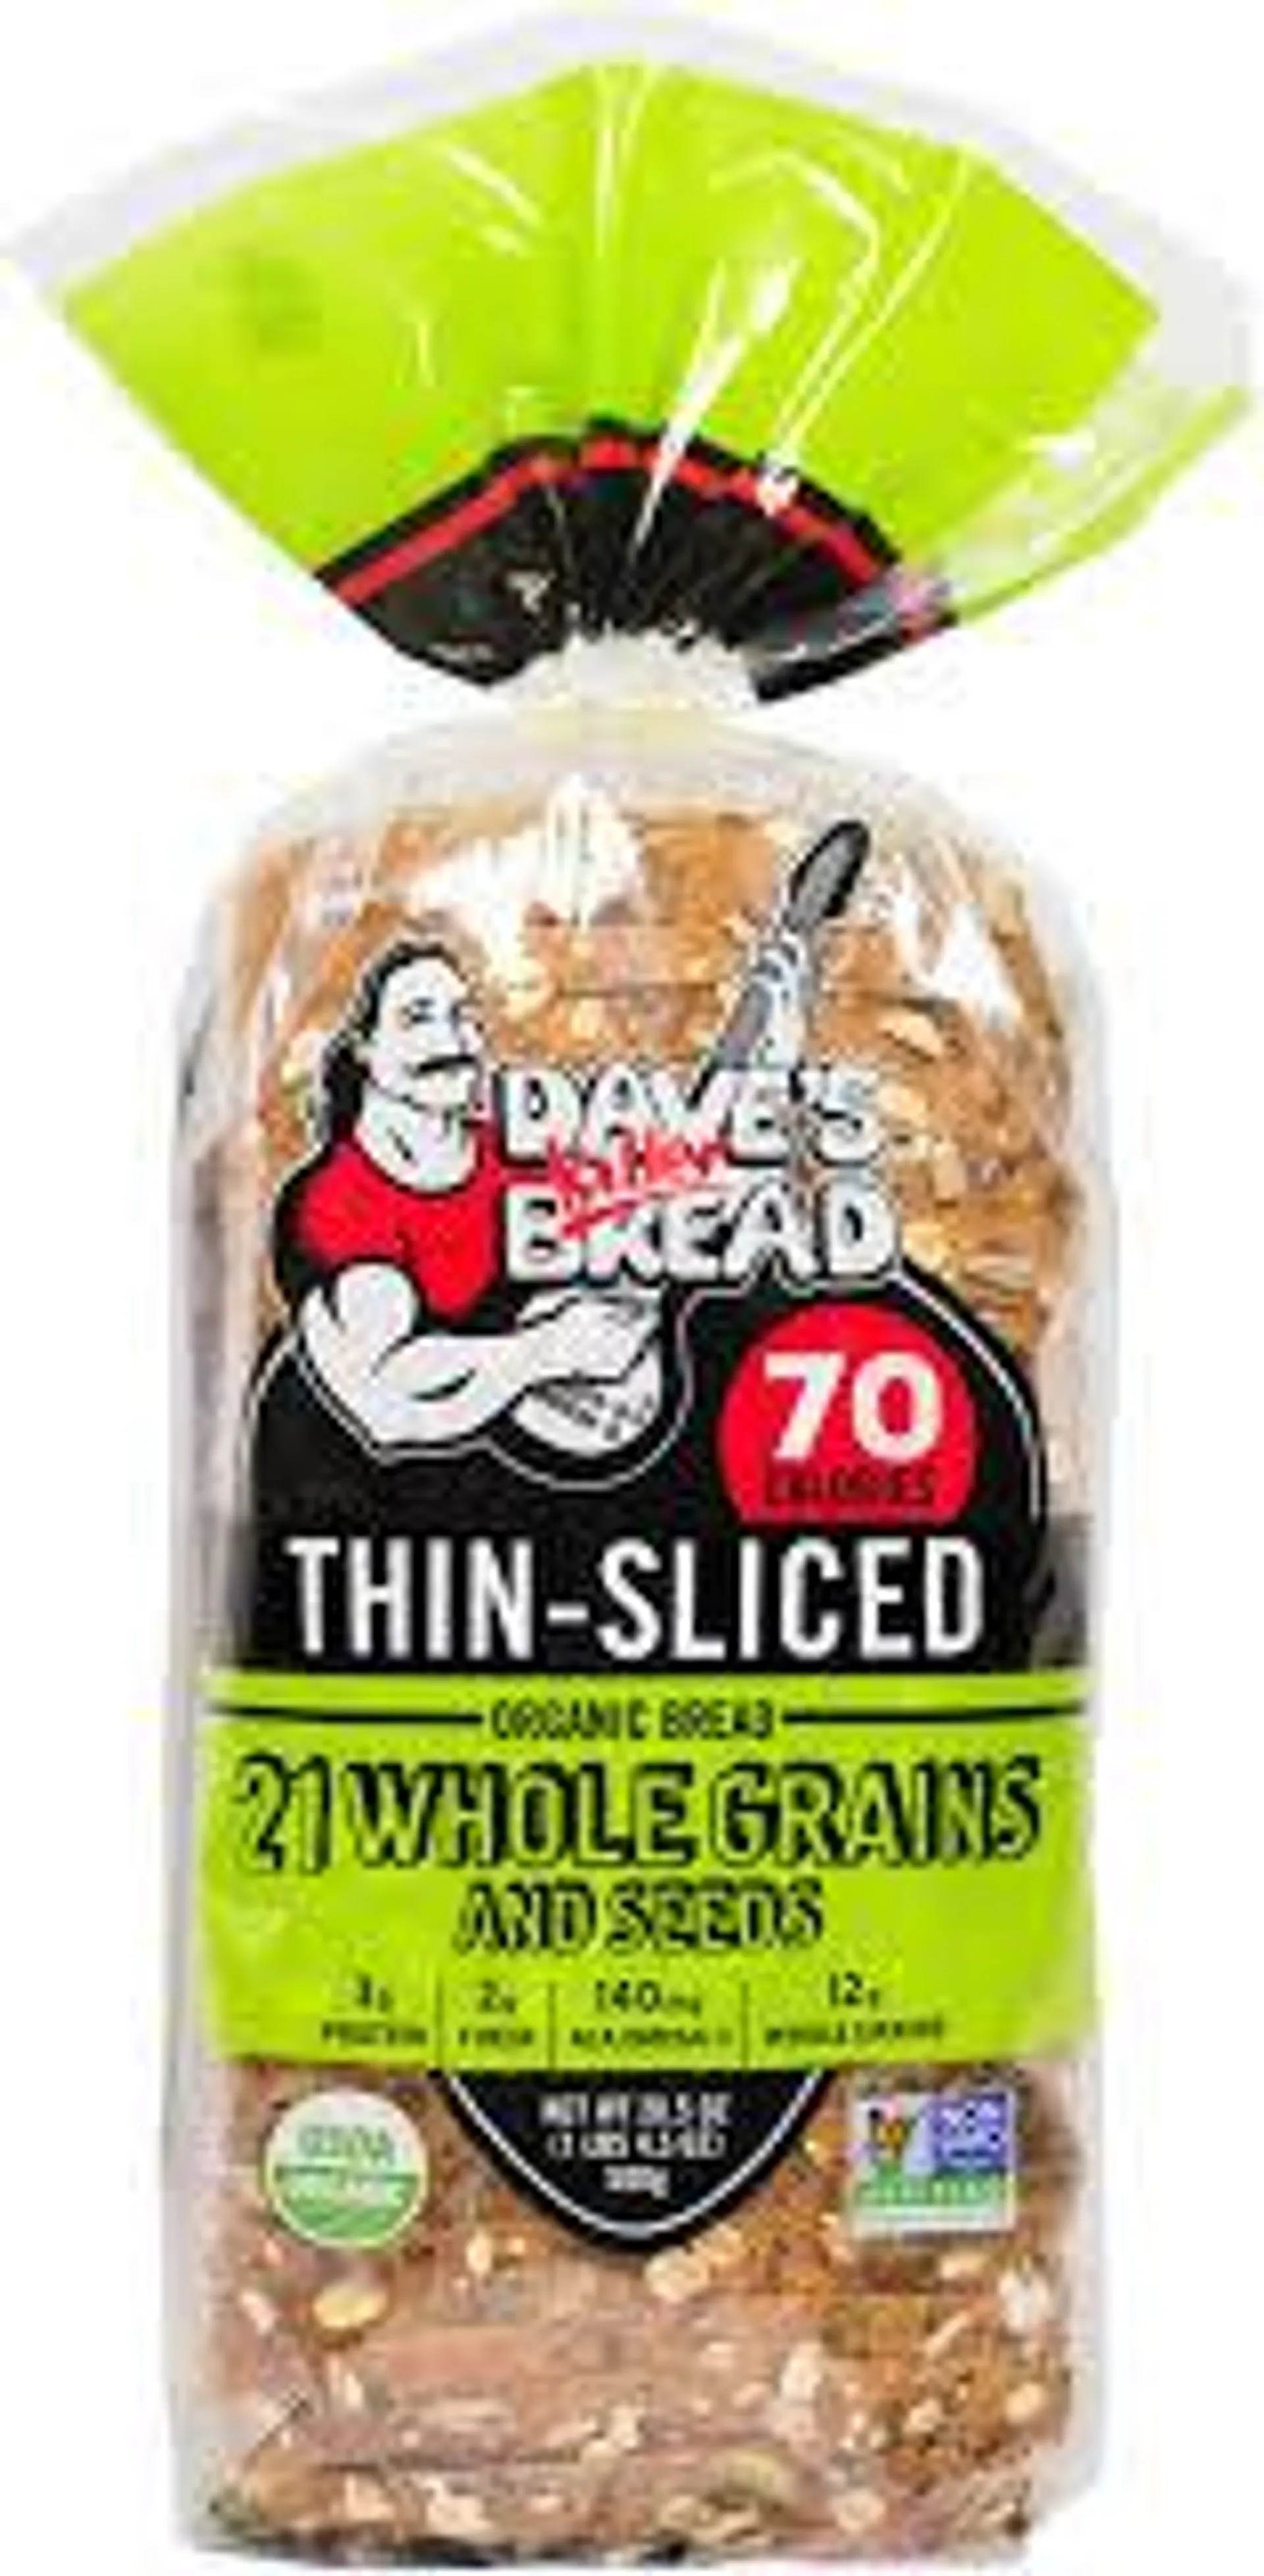 Dave's Killer Bread - Thin Sliced 21 Whole Grains and Seeds 20.5 Oz